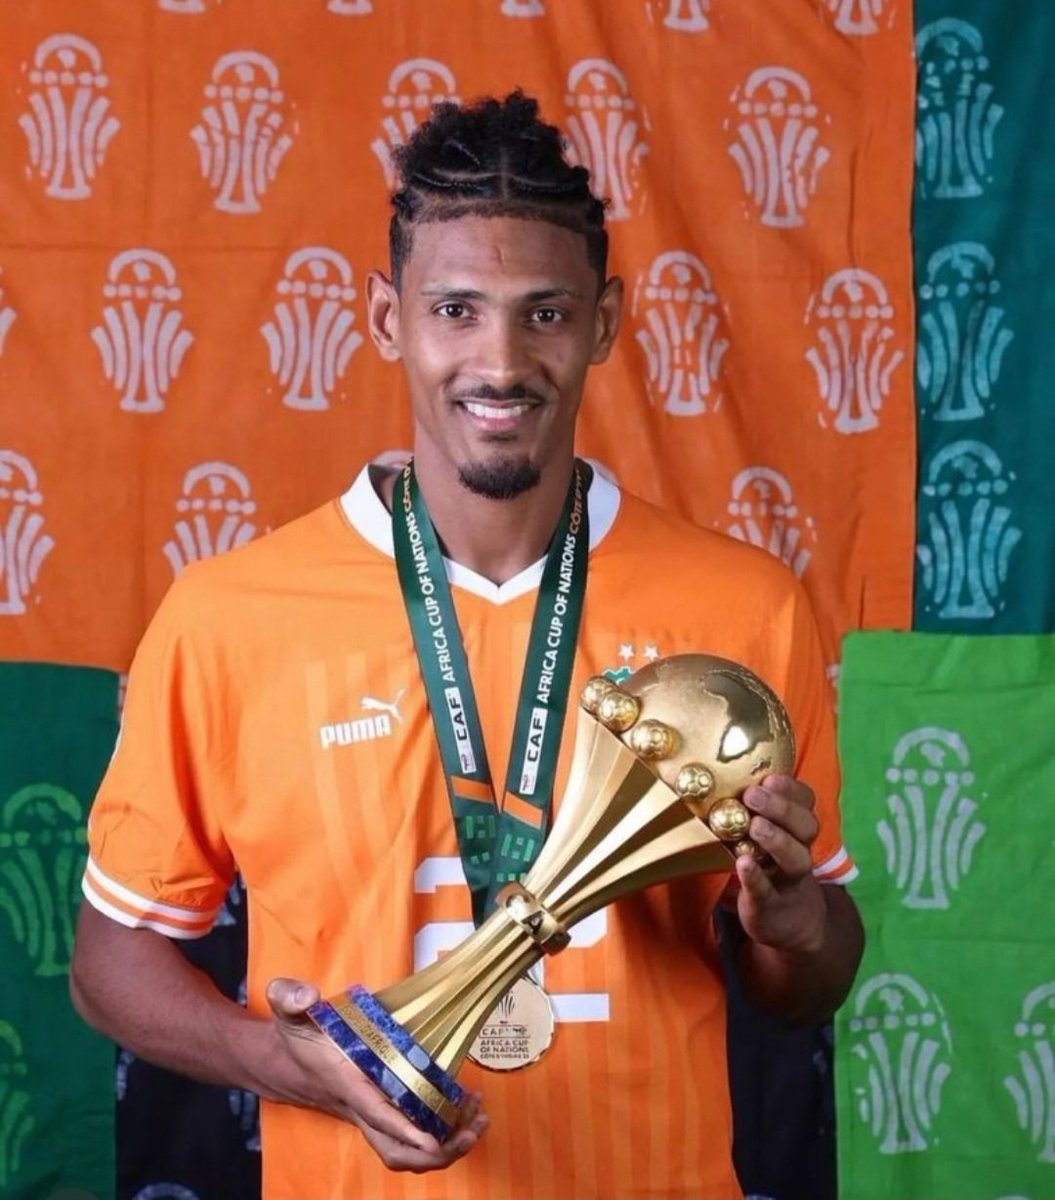 Sebastien Haller, diagnosed with cancer, beat cancer, an AFCON winner with 2 goals in the final.

Could he potentially win the Ballon d'Or if he wins the Champions League? 👀🤯